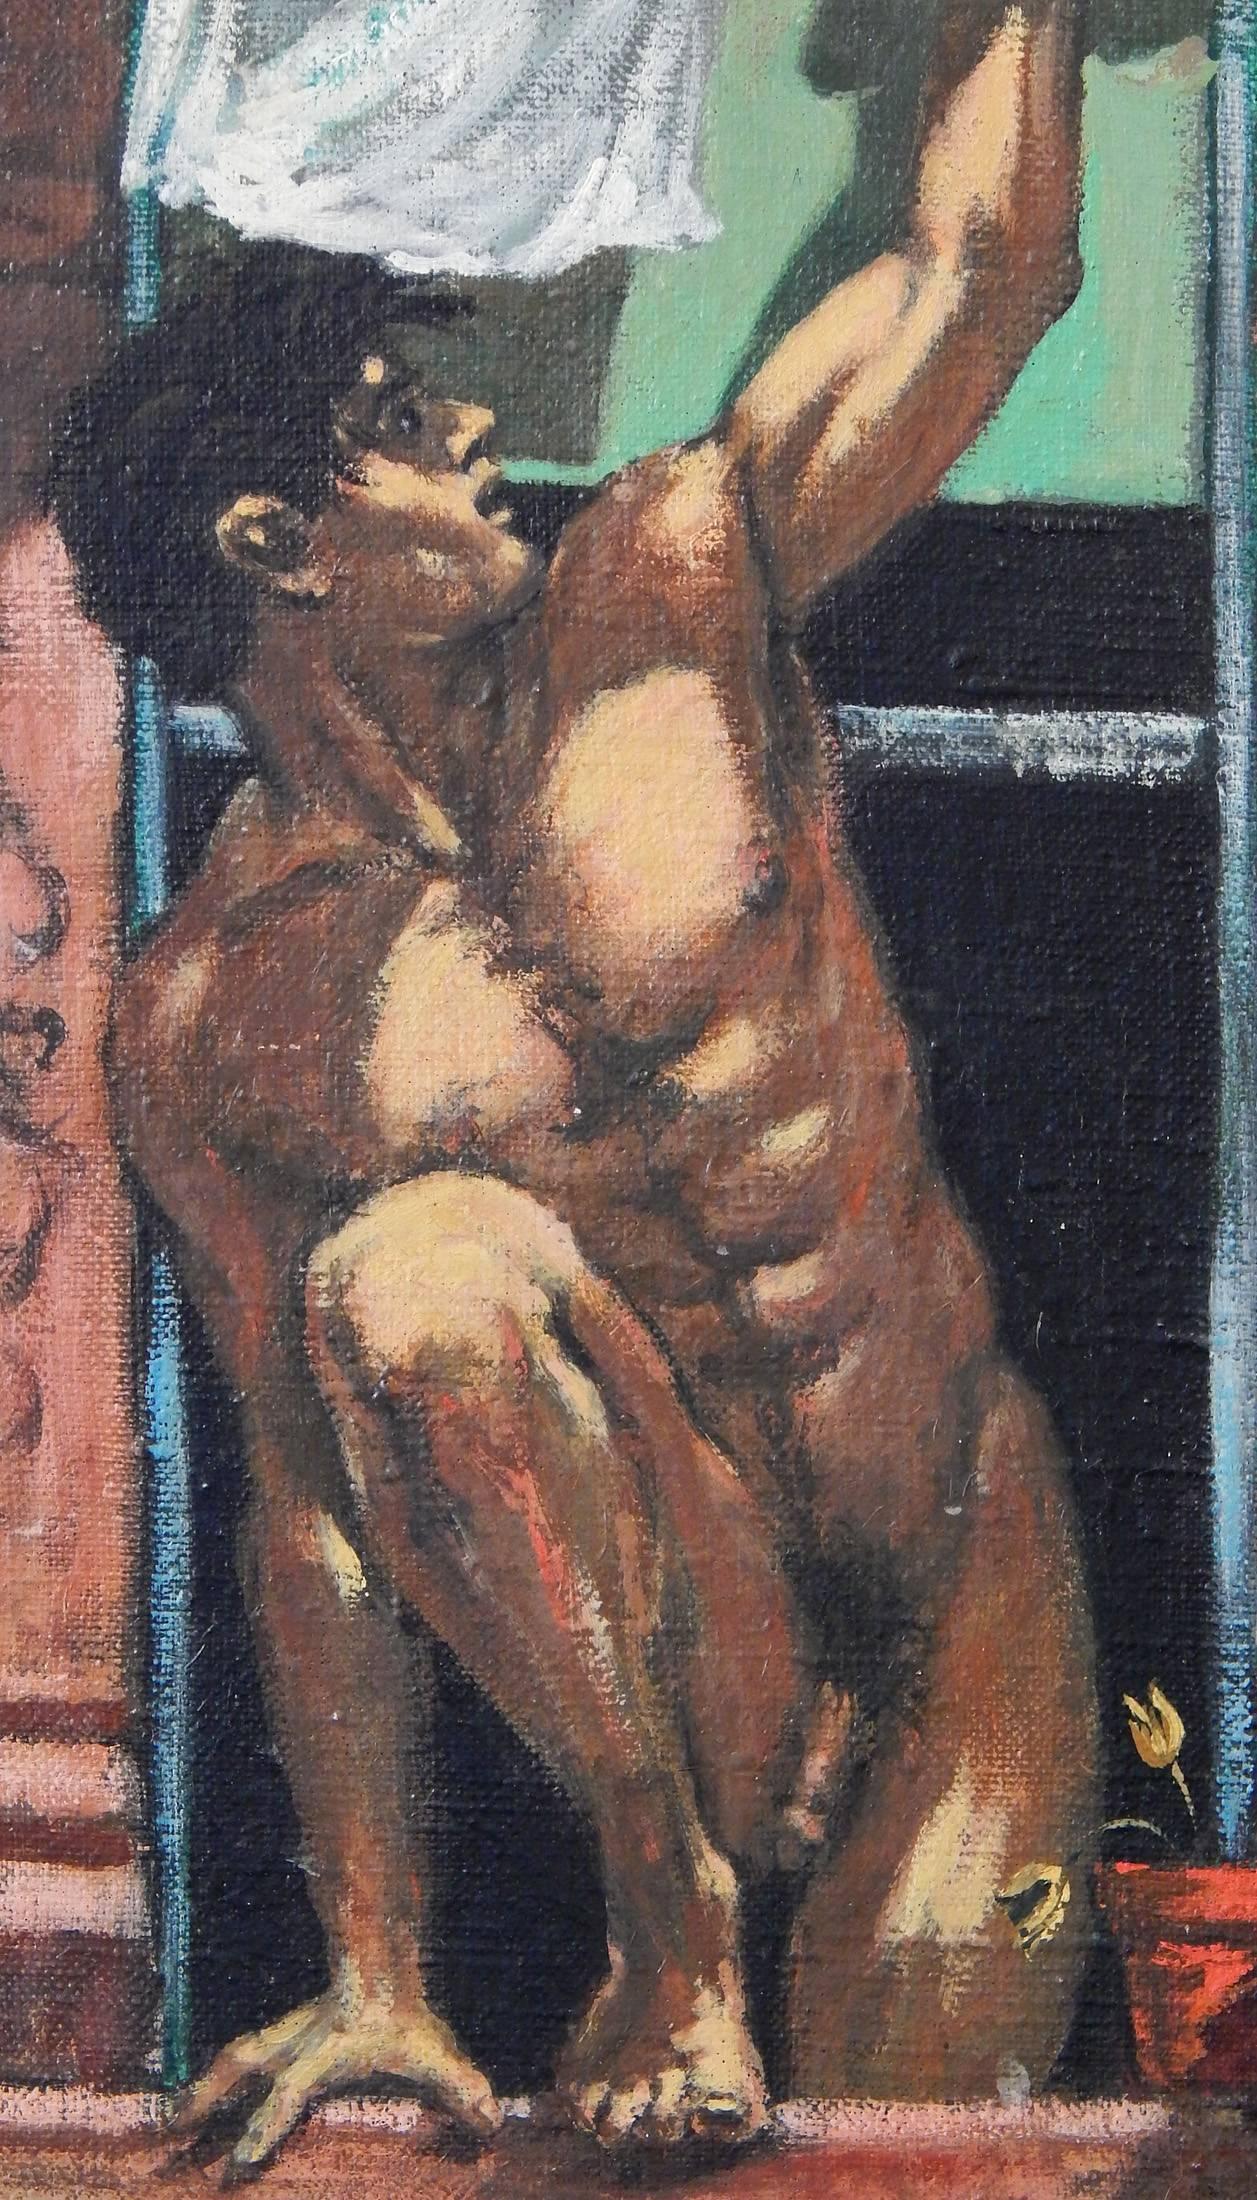 One of Edward Melcarth's masterworks, this depiction of a nude male figure stepping out on his window sill to reach his laundry, is vivid evidence of the artist's fascination with New York tenement life. He loved to depict the window as a portal